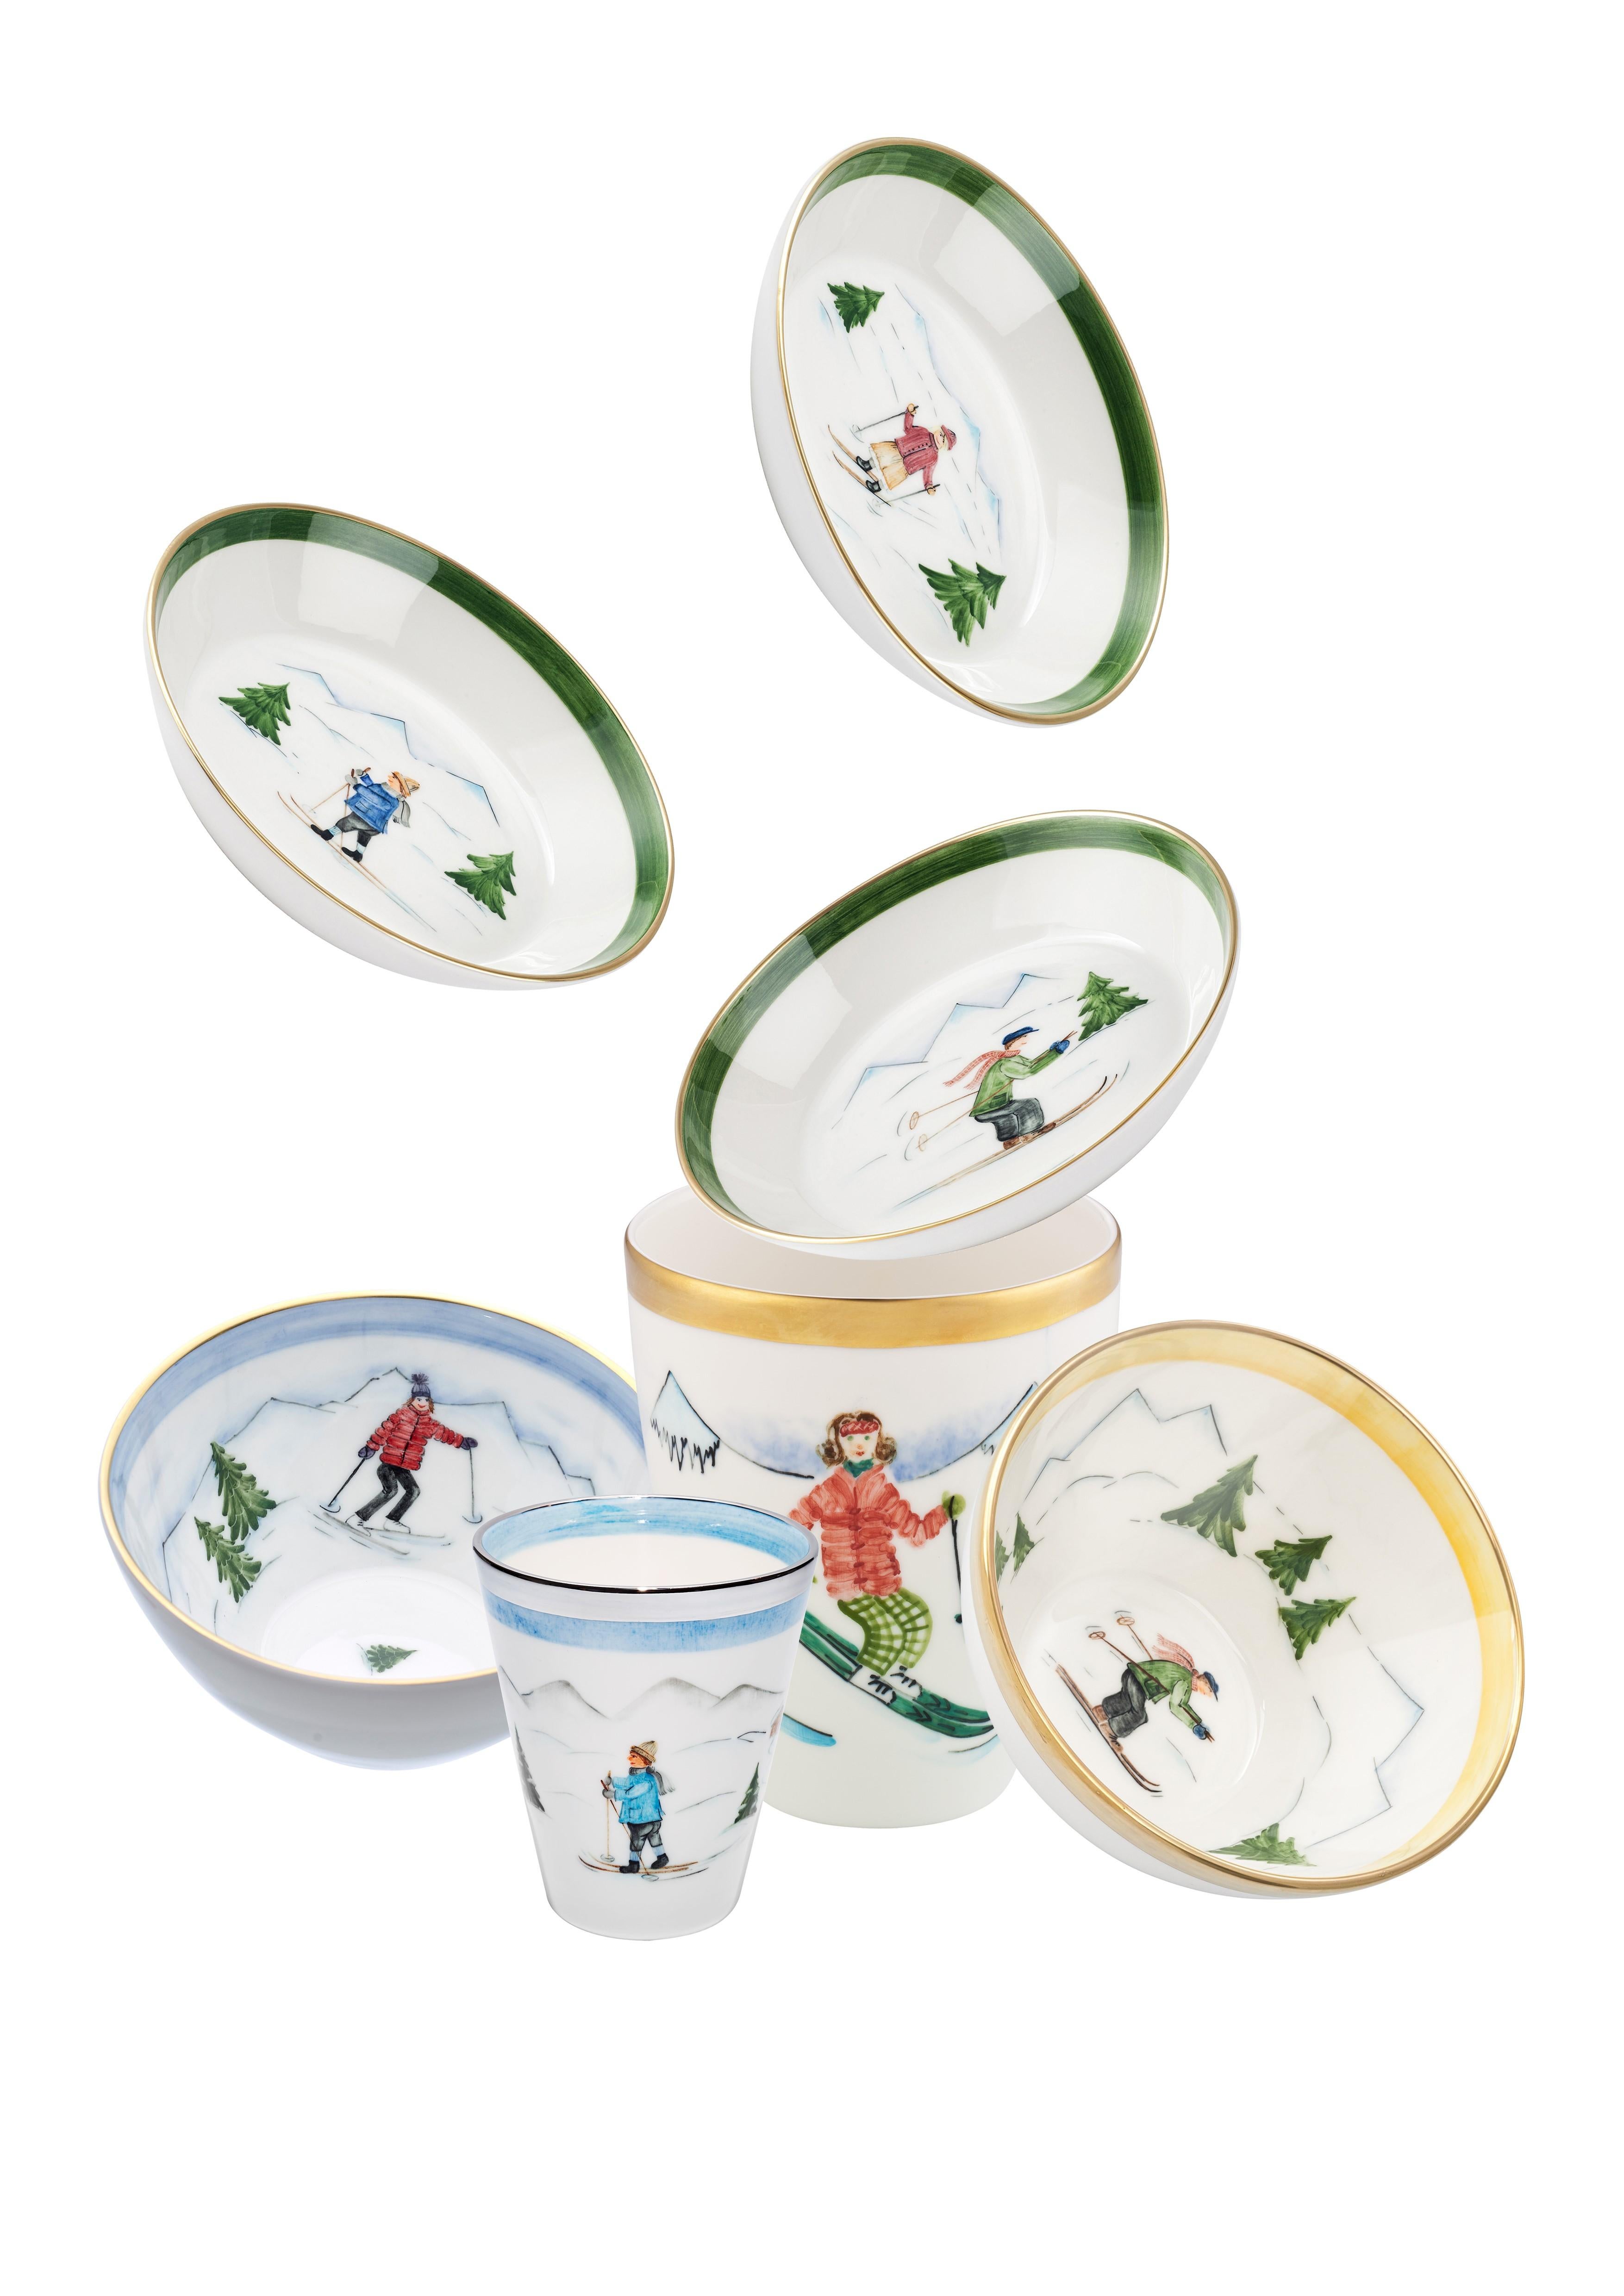 Country Style Porcelain Dish with Skier Decor Sofina Boutique Kitzbuehel In New Condition For Sale In Kitzbuhel, AT